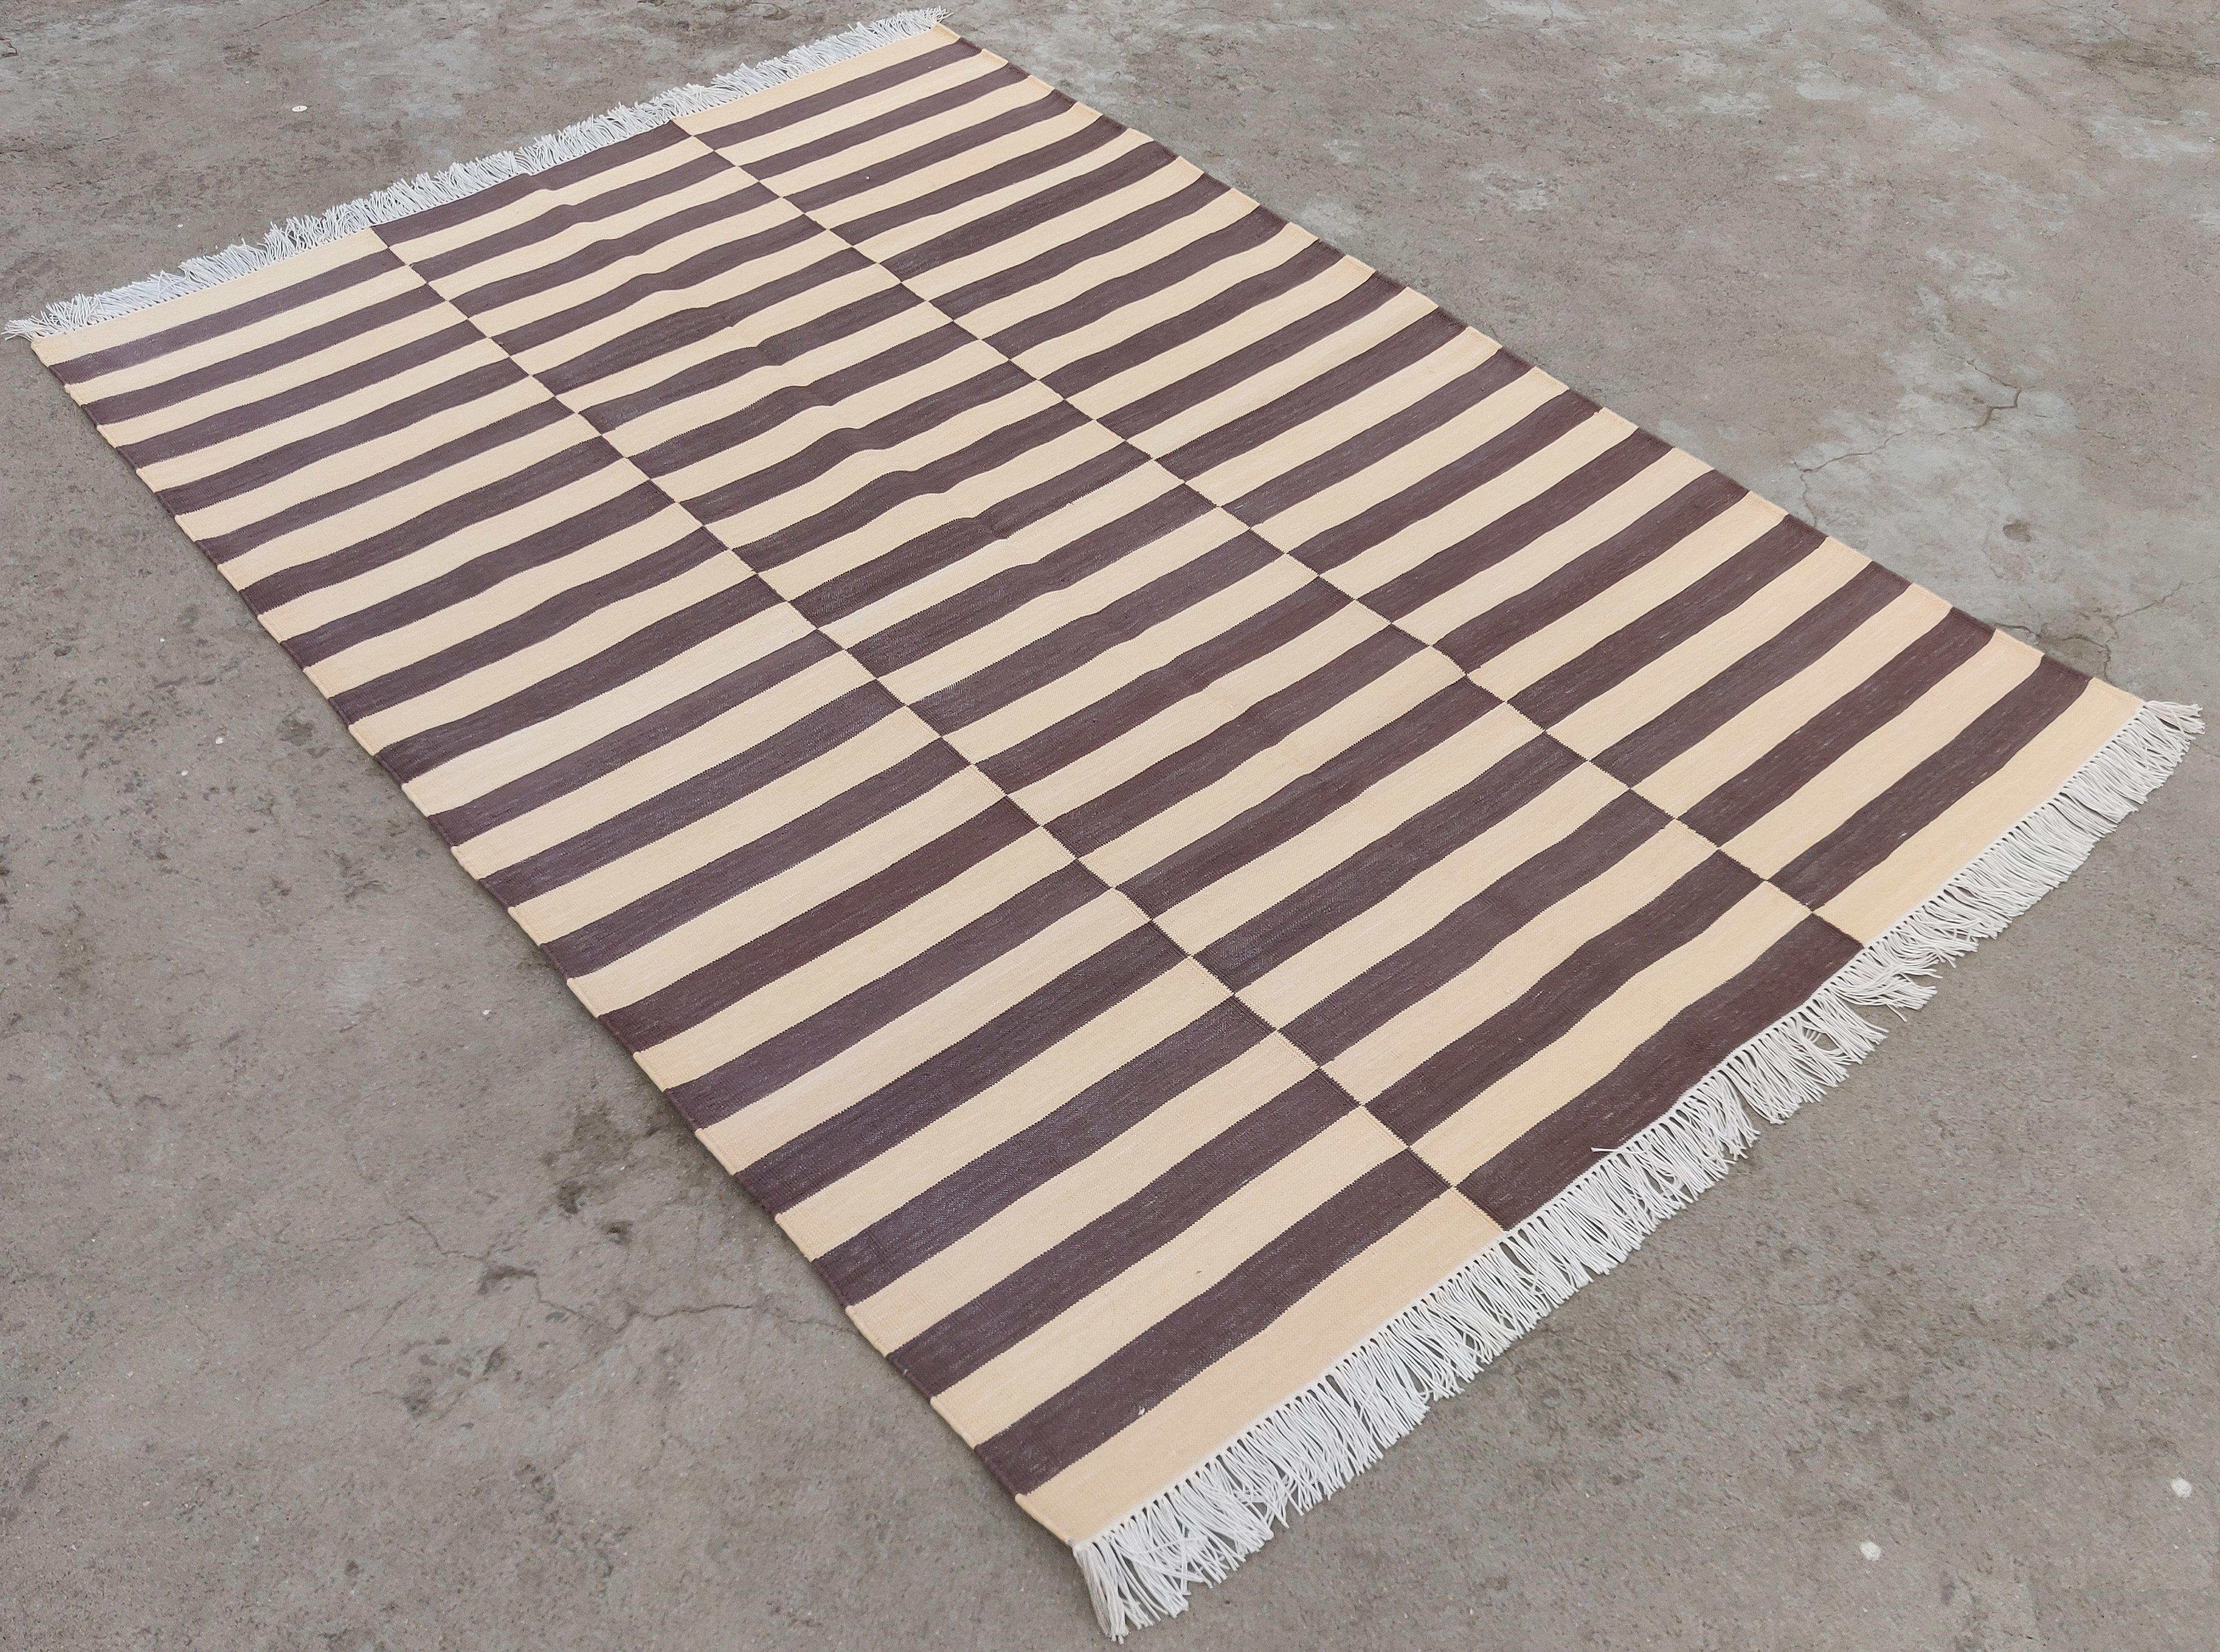 Cotton Vegetable Dyed Cream And Brown Striped Indian Dhurrie Rug-4'x6' 
These special flat-weave dhurries are hand-woven with 15 ply 100% cotton yarn. Due to the special manufacturing techniques used to create our rugs, the size and color of each